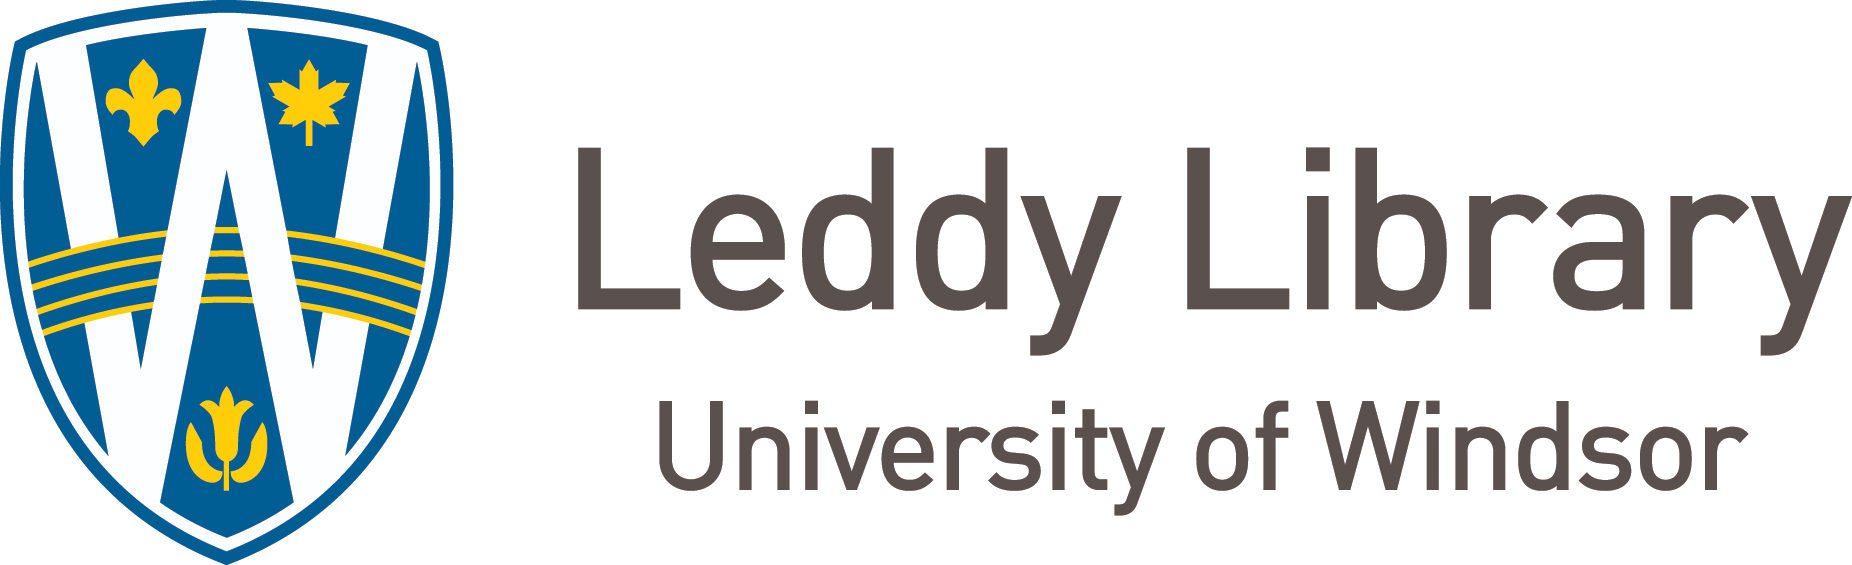 leddy Library University of Windsor with shield crest